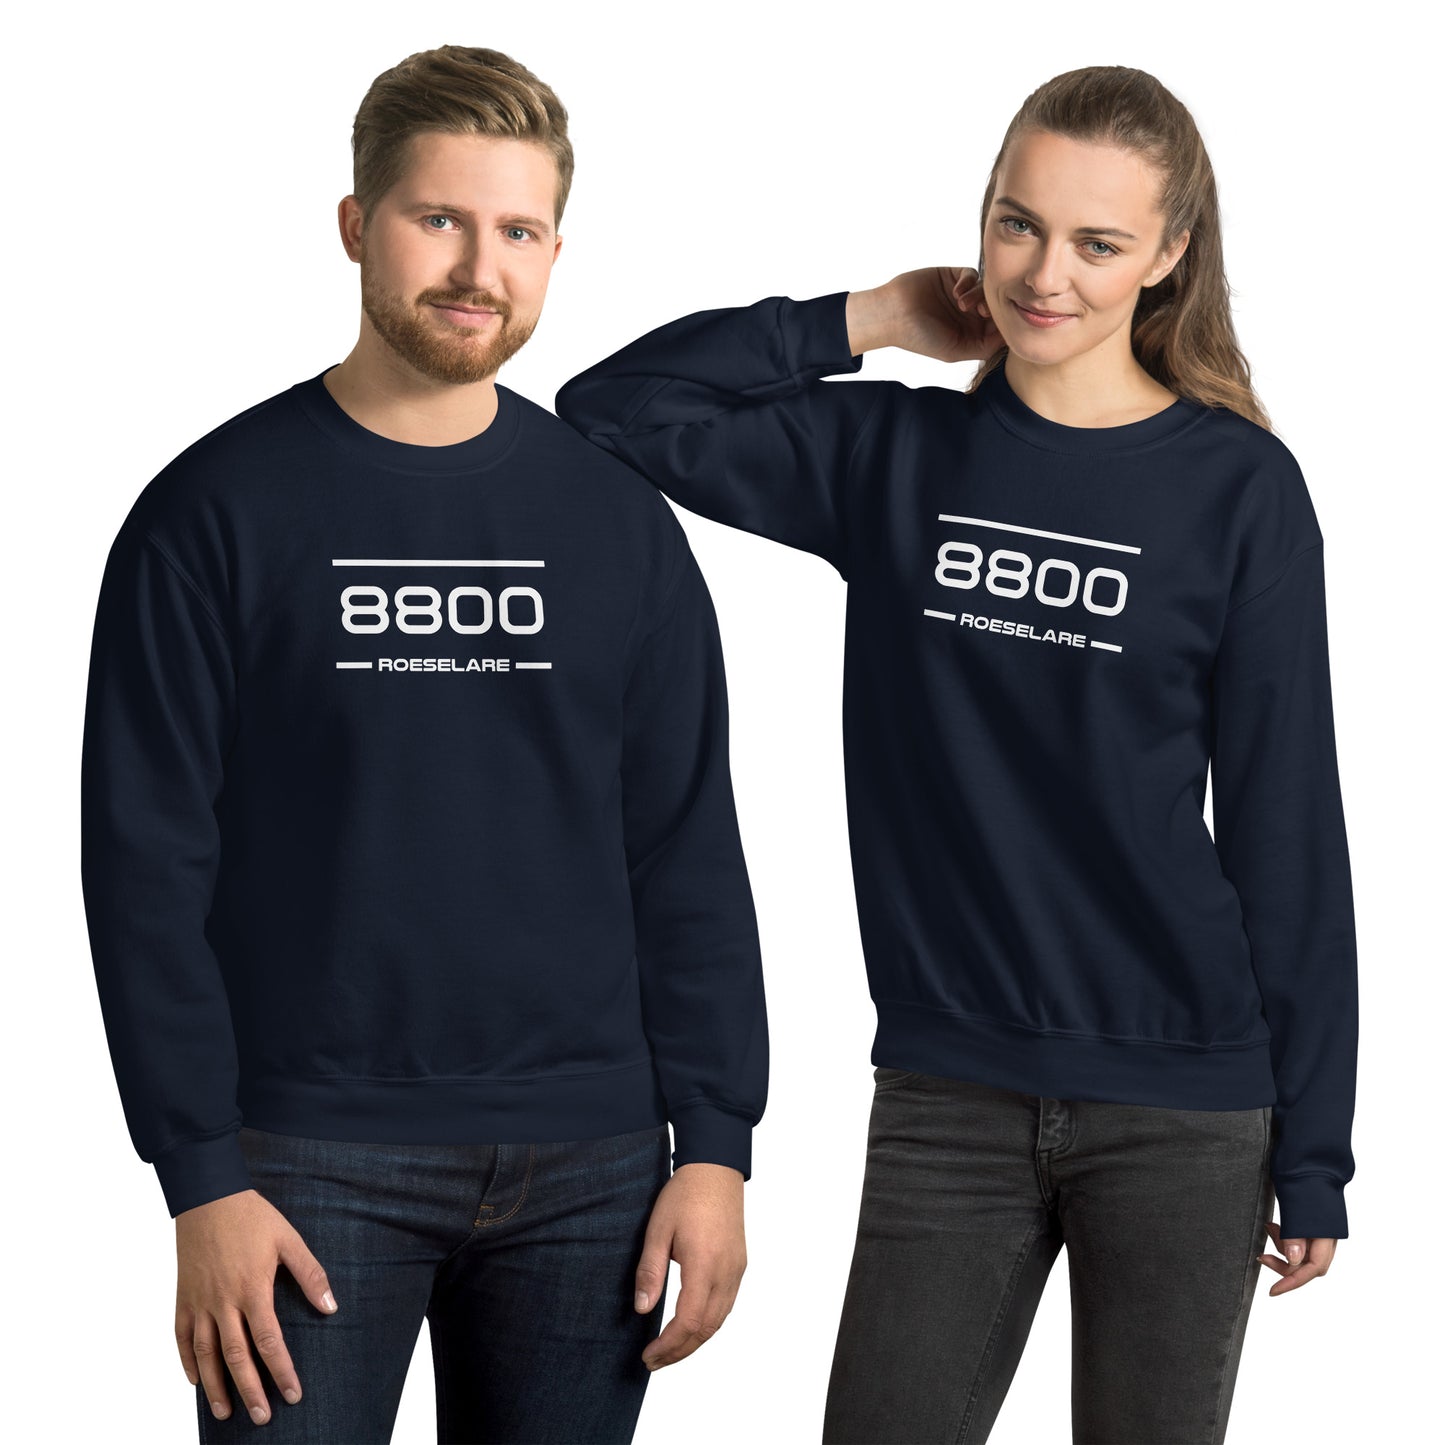 Sweater - 8800 - Roeselare (M/V)